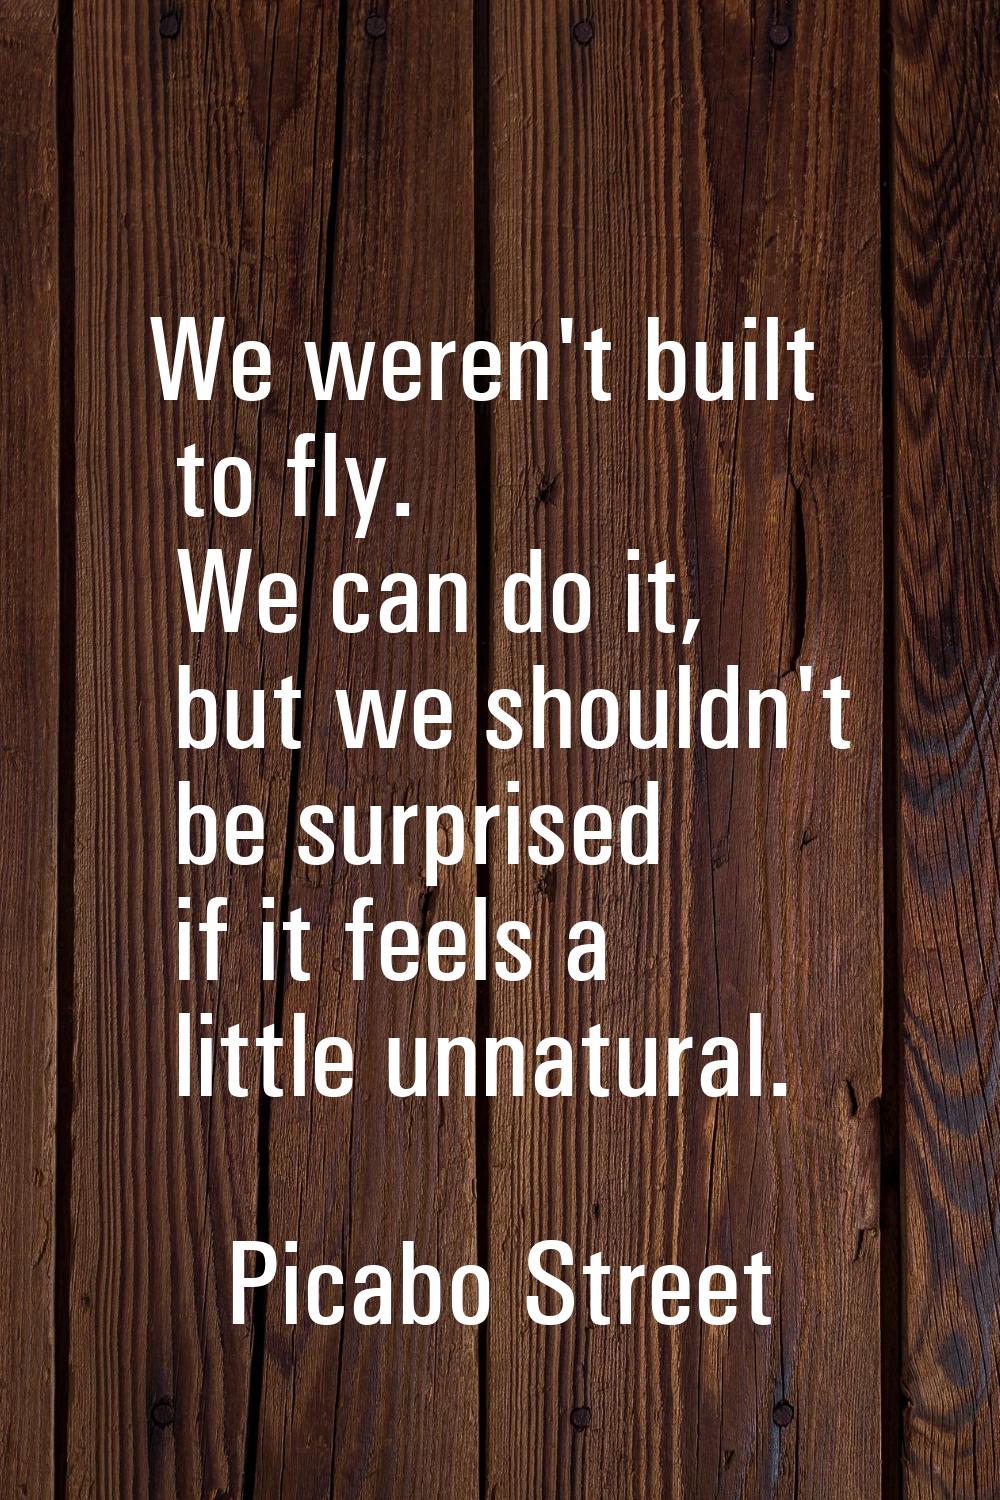 We weren't built to fly. We can do it, but we shouldn't be surprised if it feels a little unnatural